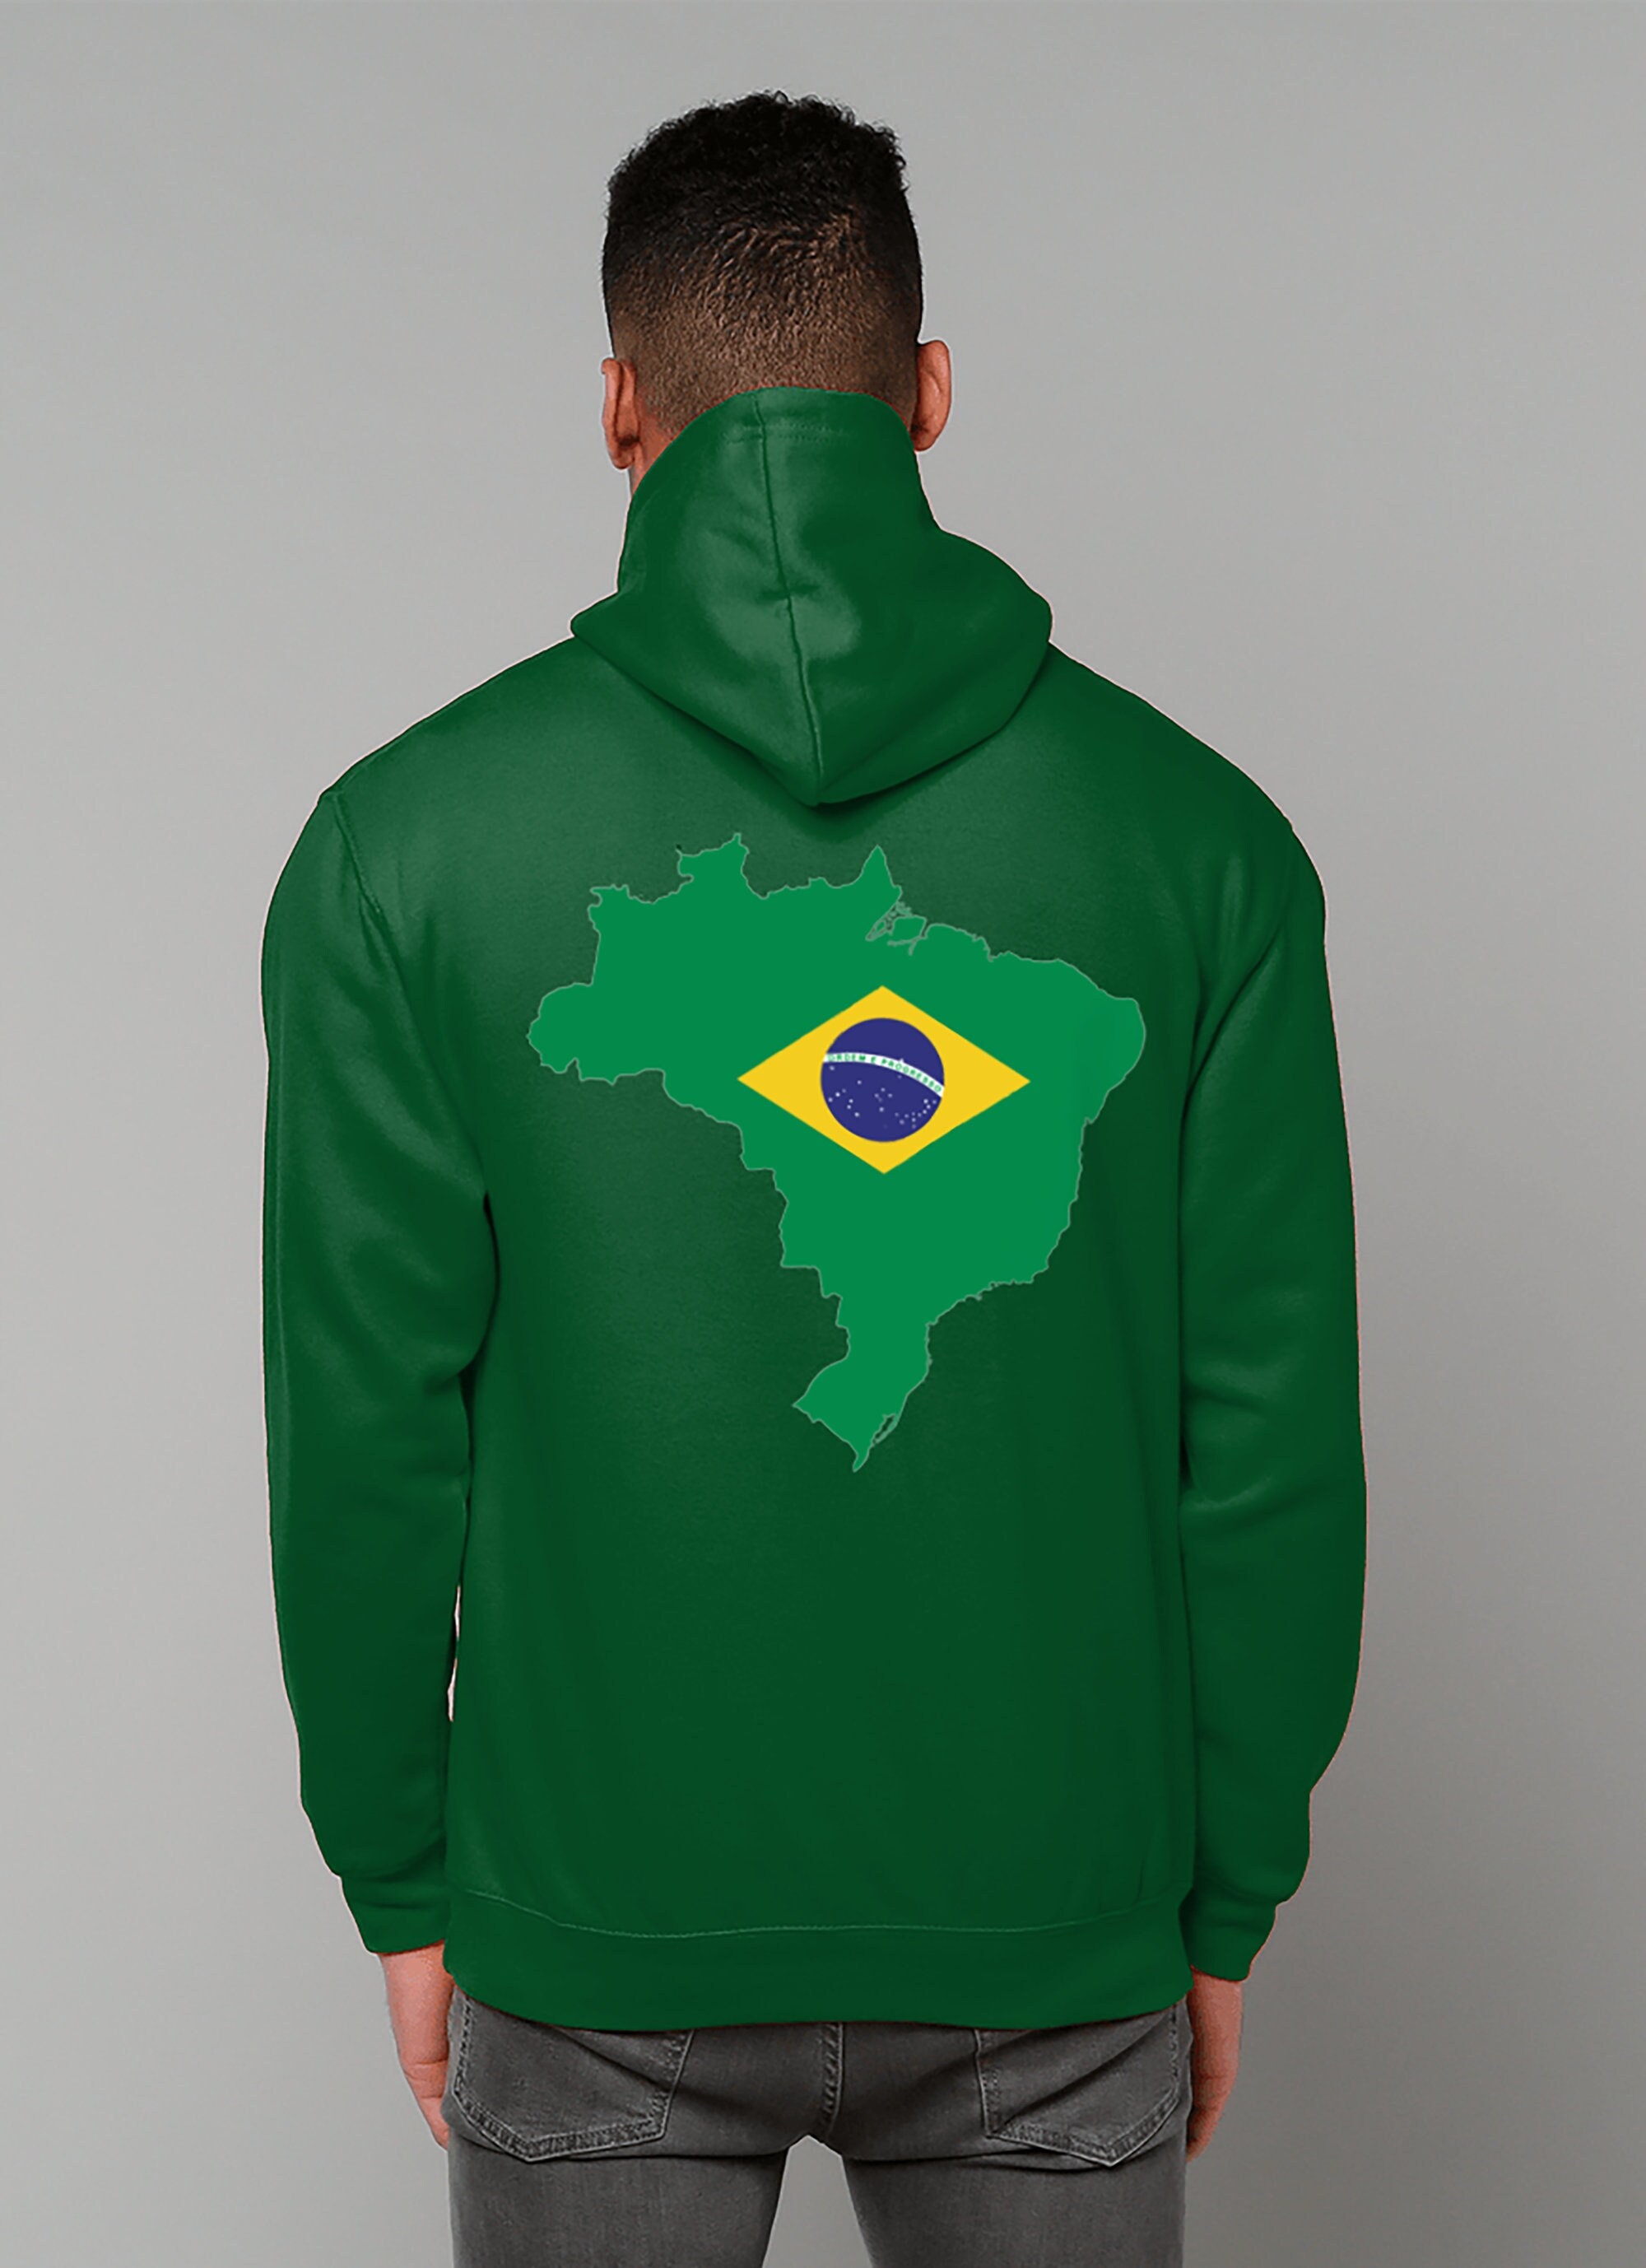 Brazil Hoodie Front and Back Printed Coat of Arms Map & Flag